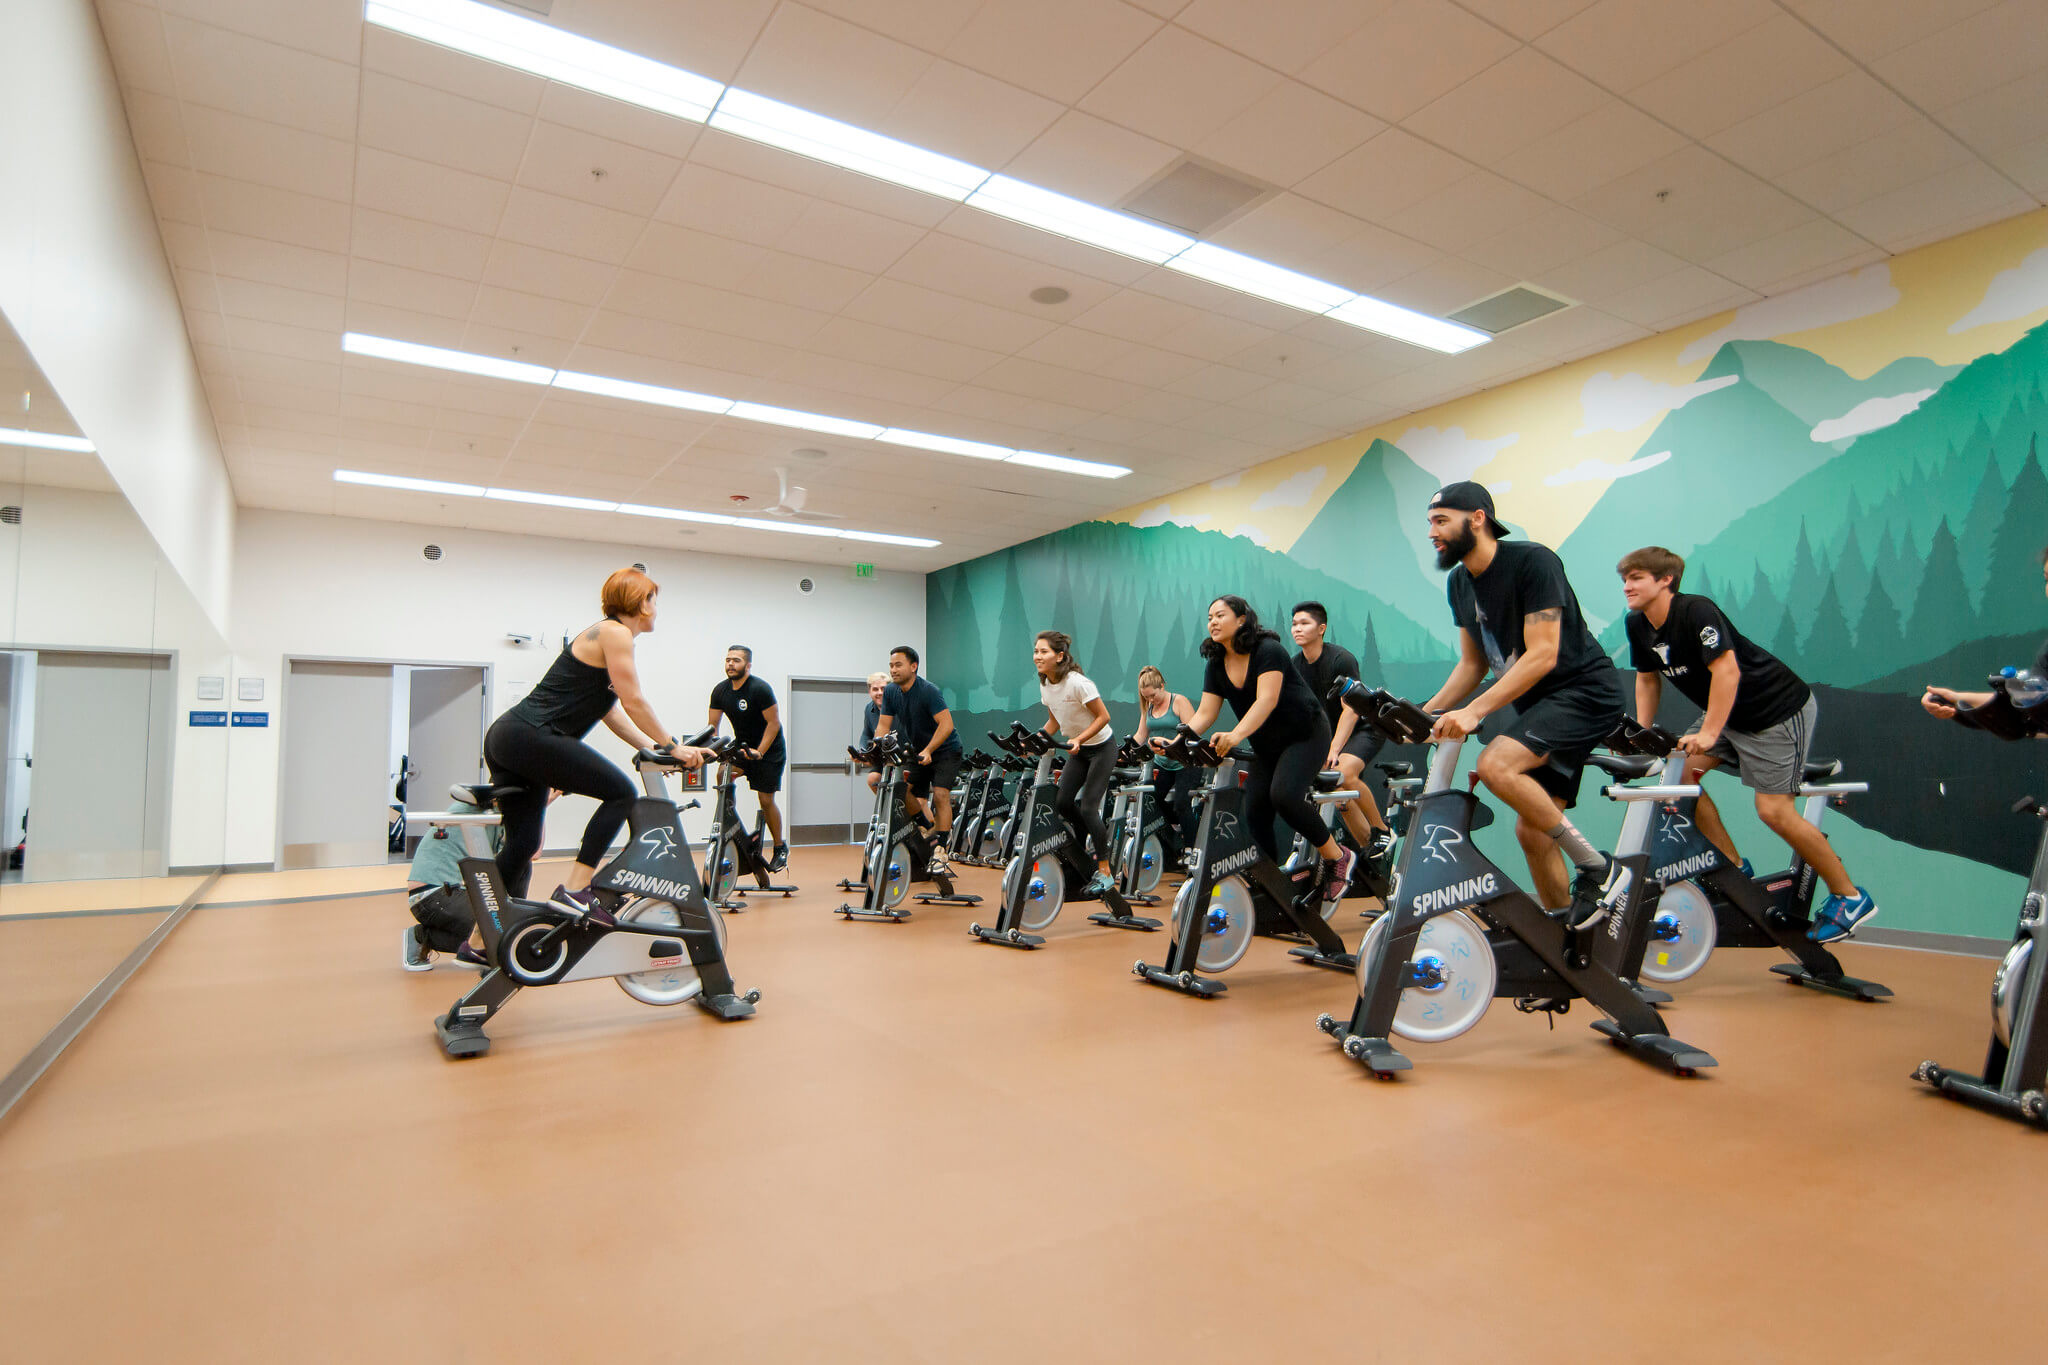 Students participating in a spin class